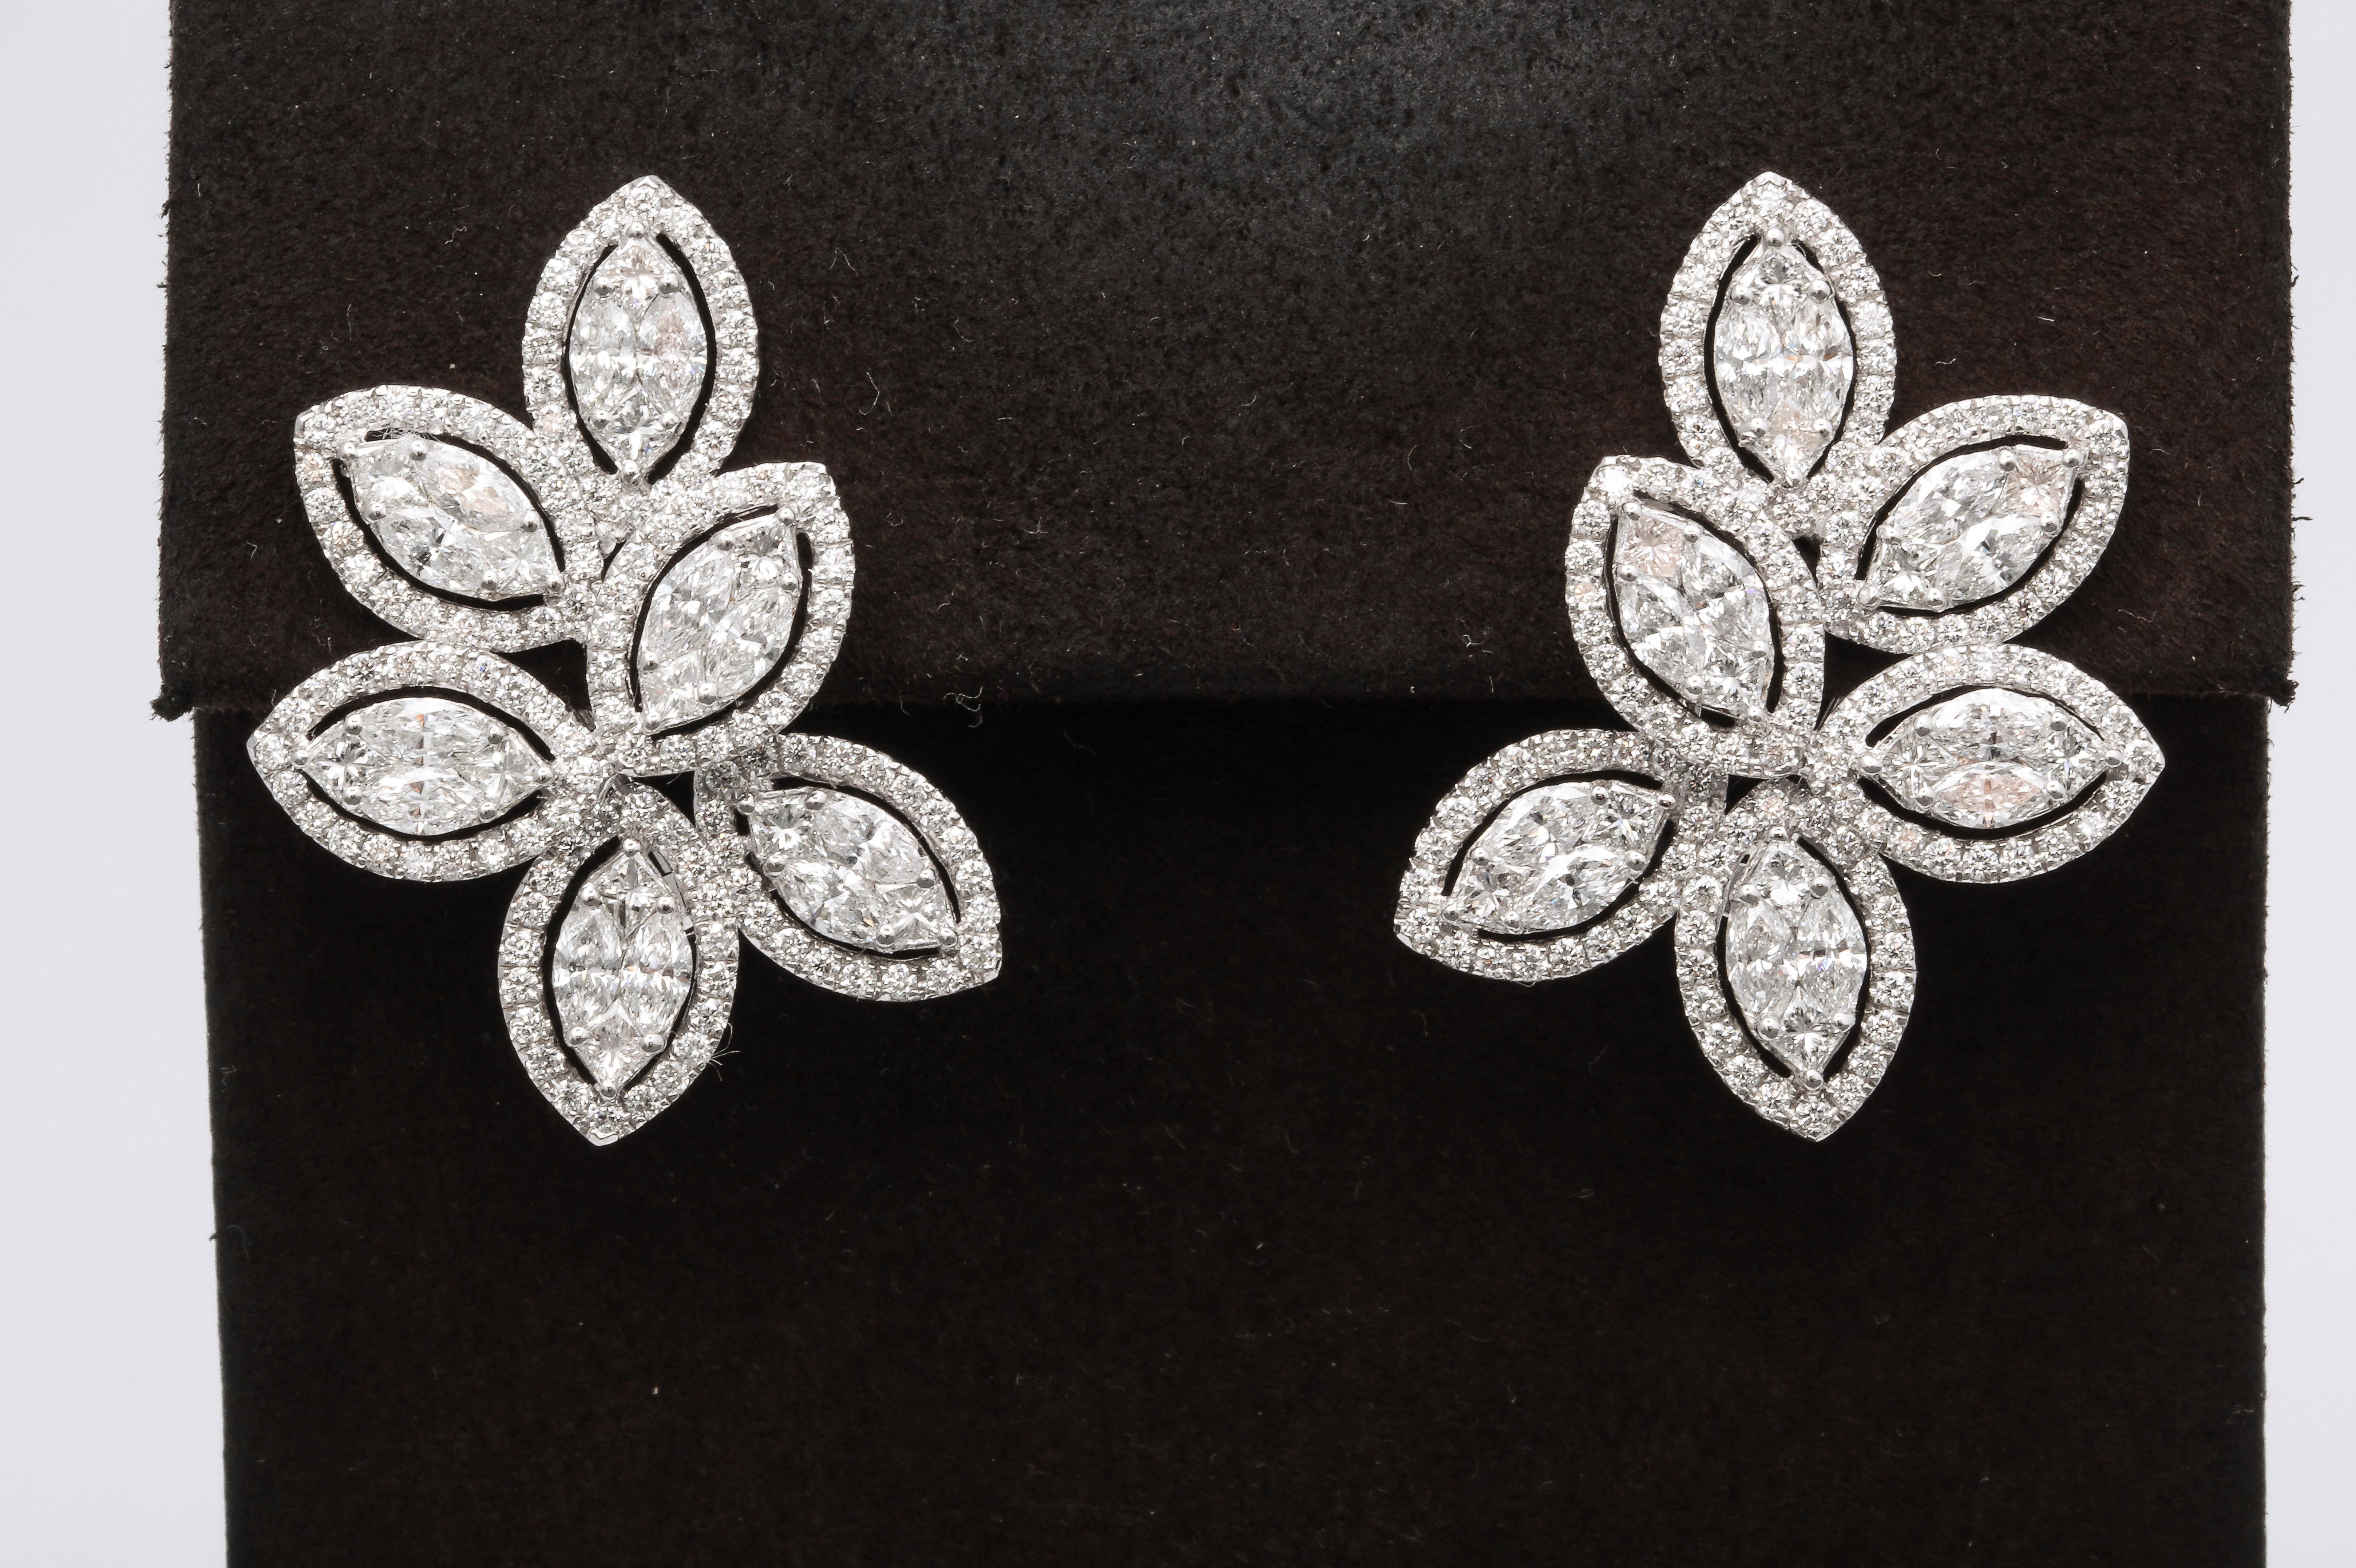 
A stunning pair of Diamond Cluster Halo Earrings 

6 Illusion set marquise diamonds surrounded by thin round brilliant cut halos for maximum sparkle!

6.06 carats set in 18k white gold.

Approximately 3 cm long and 2.2 cm wide. 